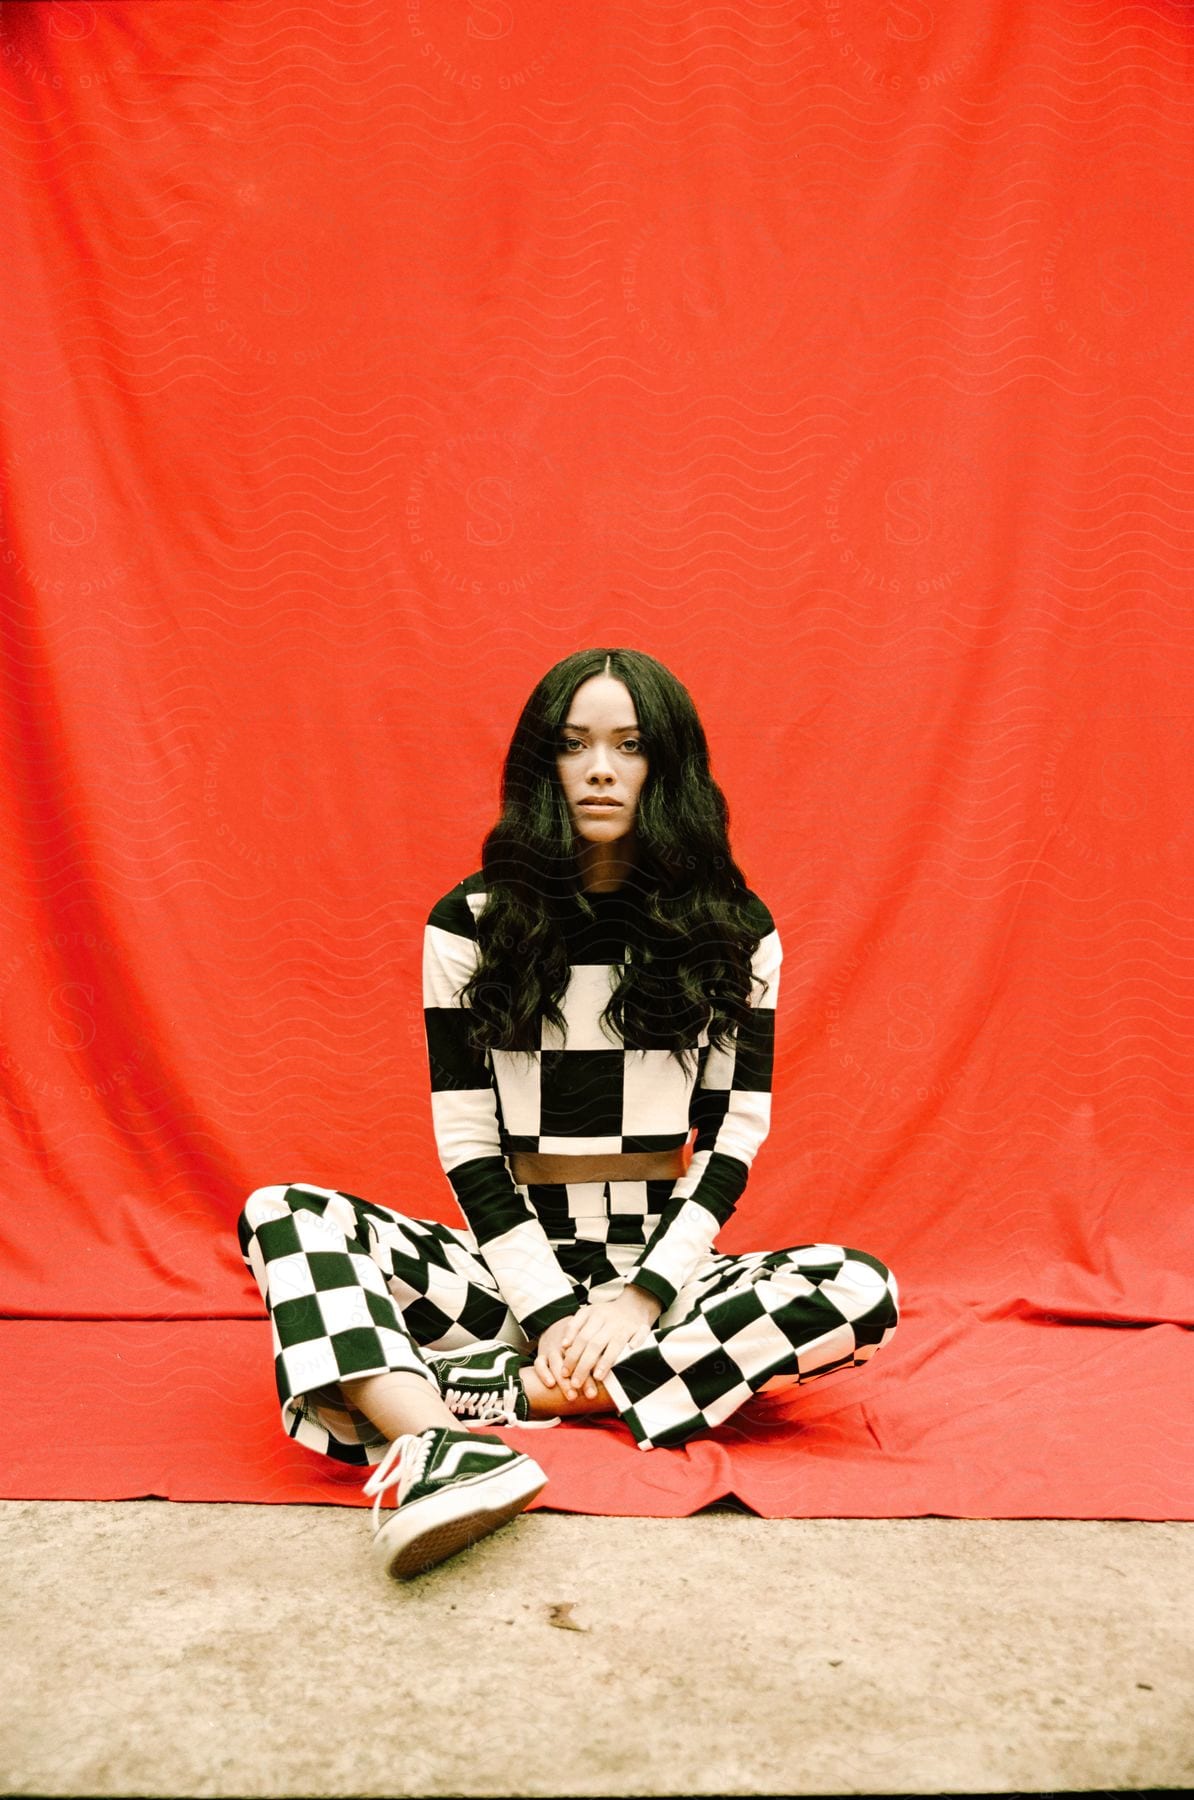 Woman wearing checked patterned outfit sits at base of red canvas backdrop in photography studio.